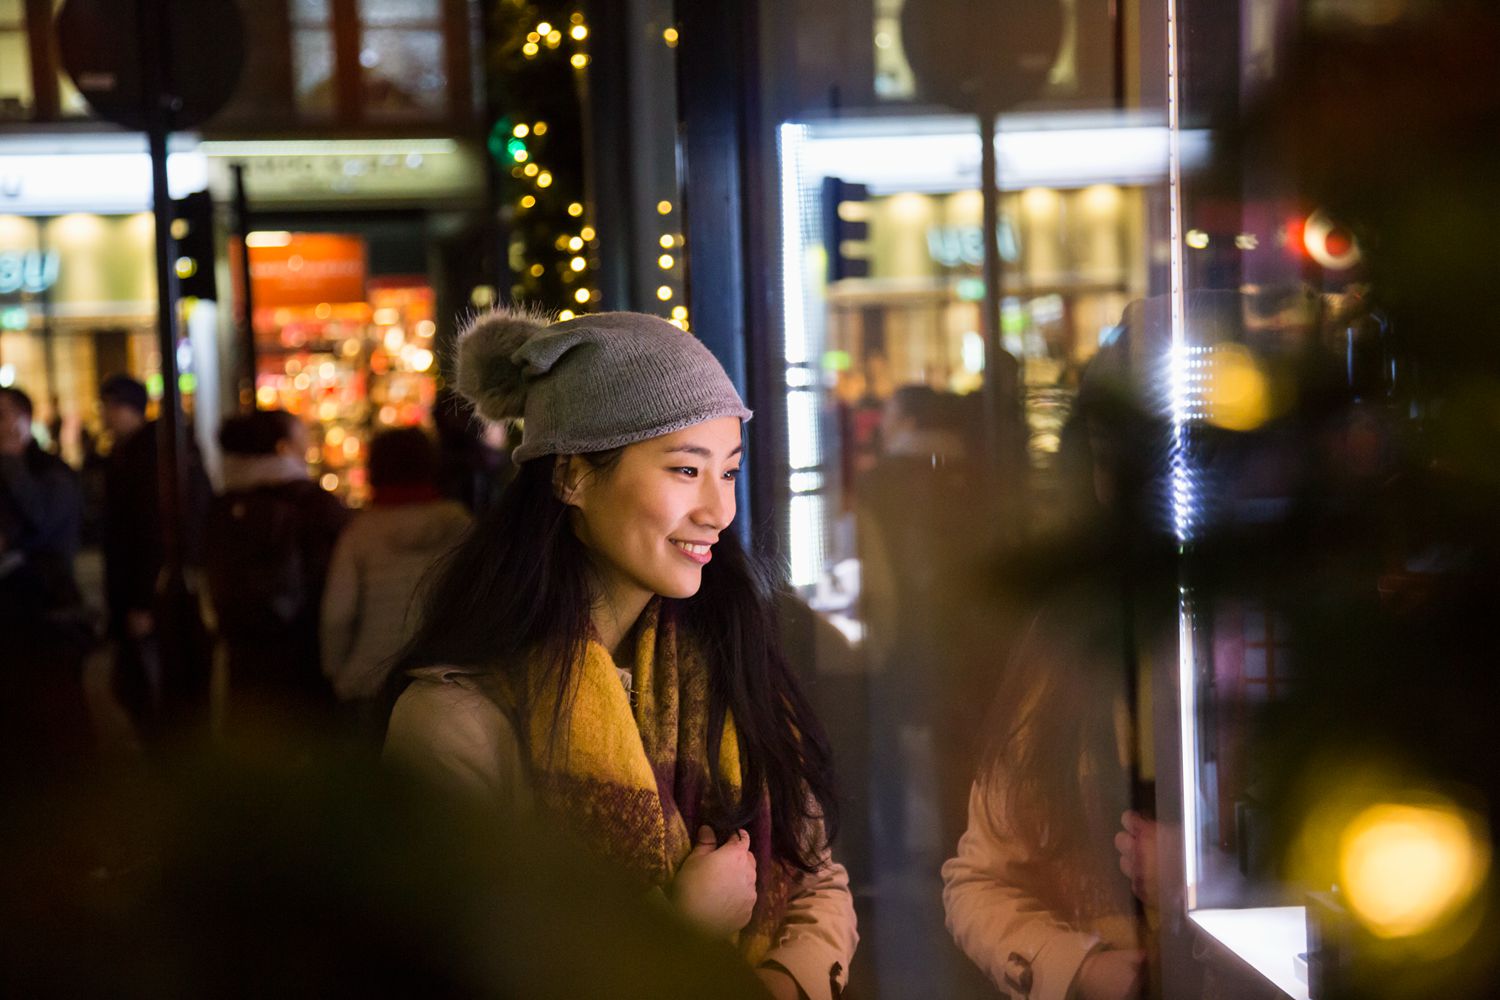 East Asian woman looking into shop window at evening.